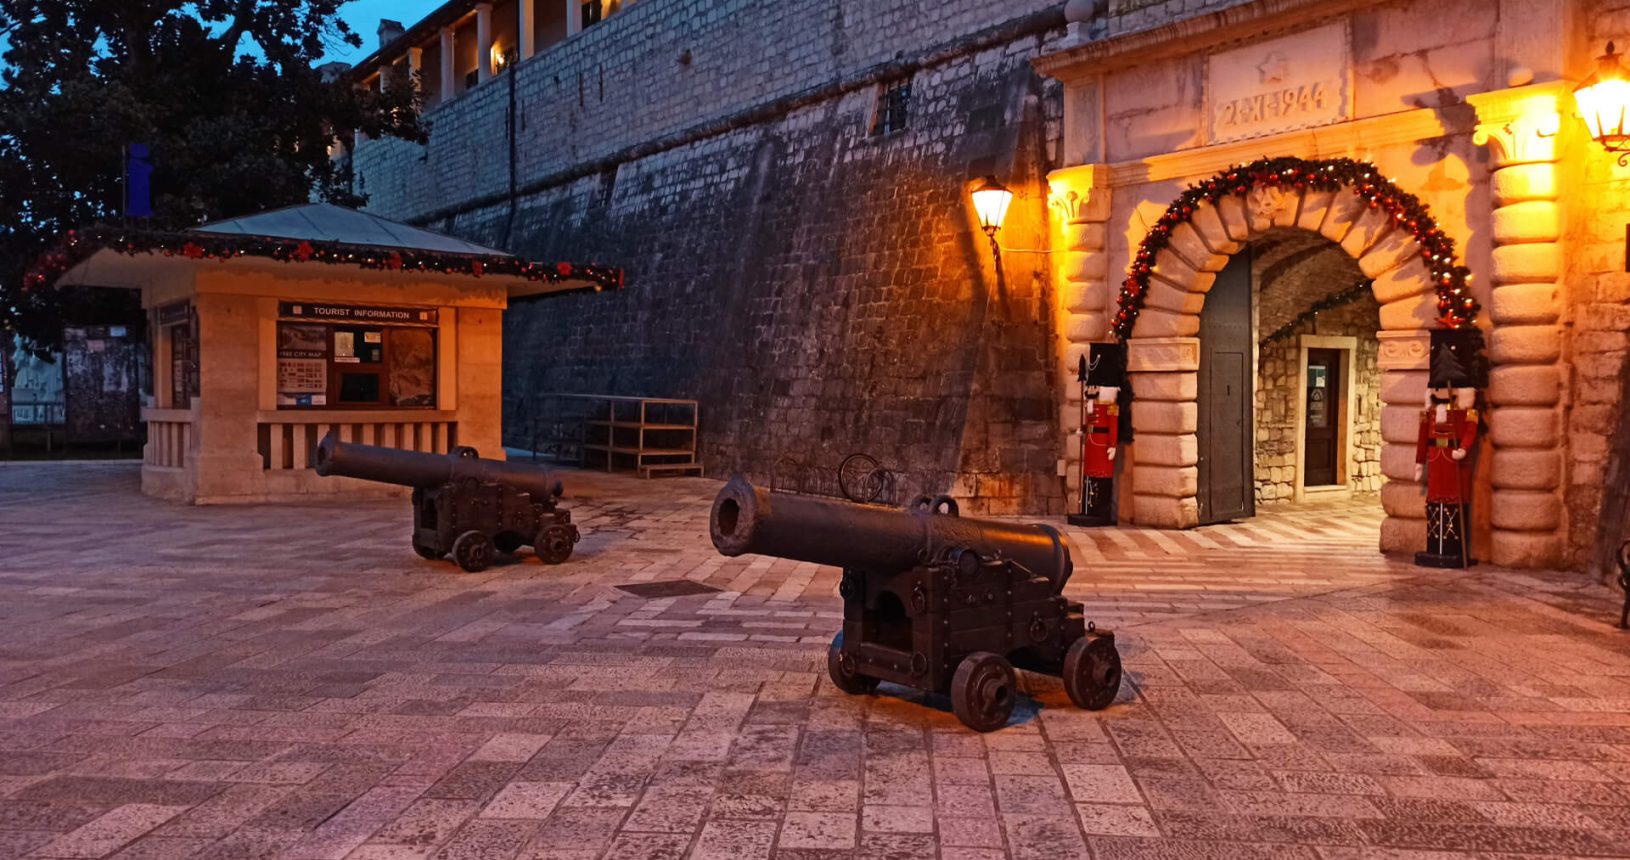 The entrance to the Old Town Kotor at night